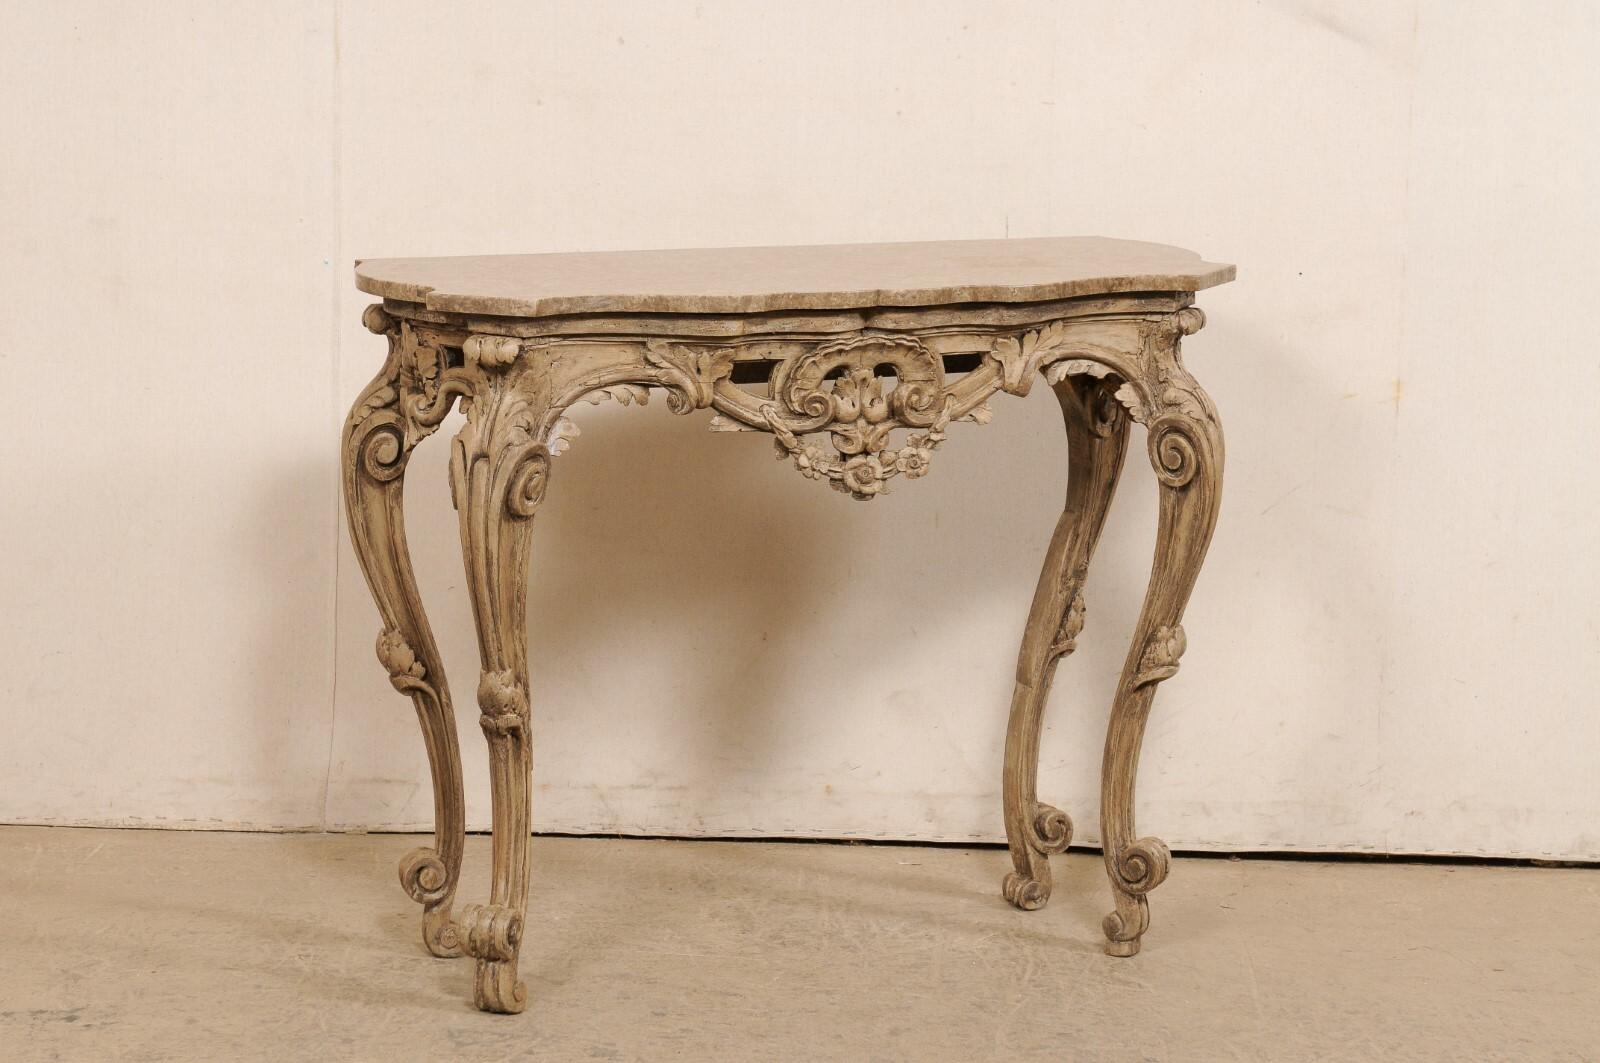 An Italian Rococo style carved wood console table with marble top from the early 19th century. This antique table from Italy has a shapely cut marble top along front-side, with canted front corners and a flattened backside (as made to rest against a